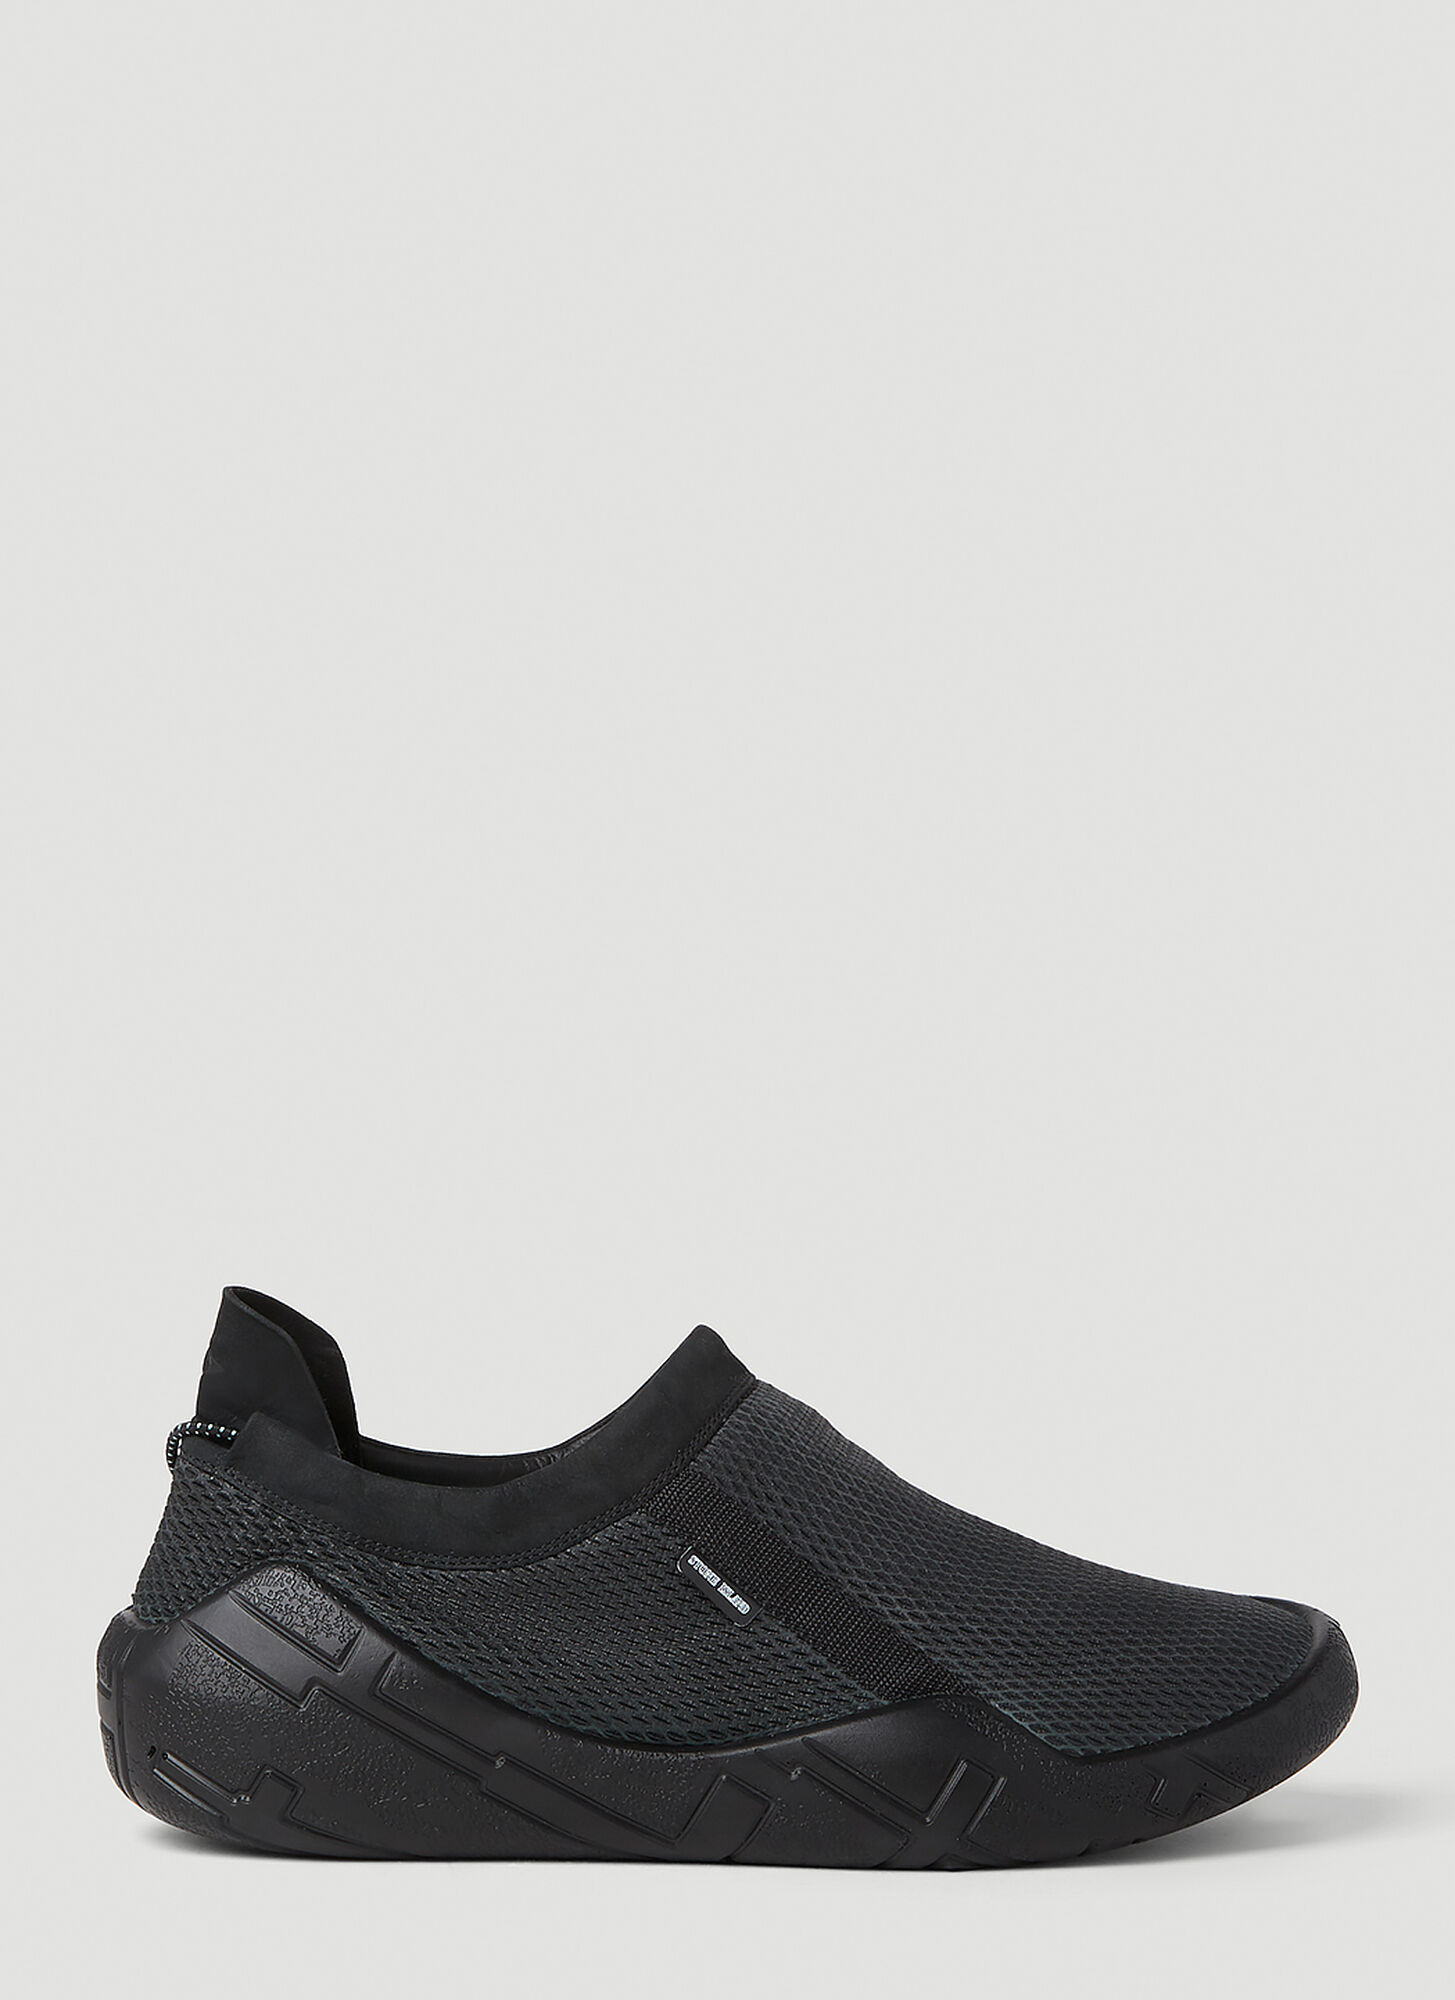 STONE ISLAND SHADOW PROJECT RESTING SNEAKERS